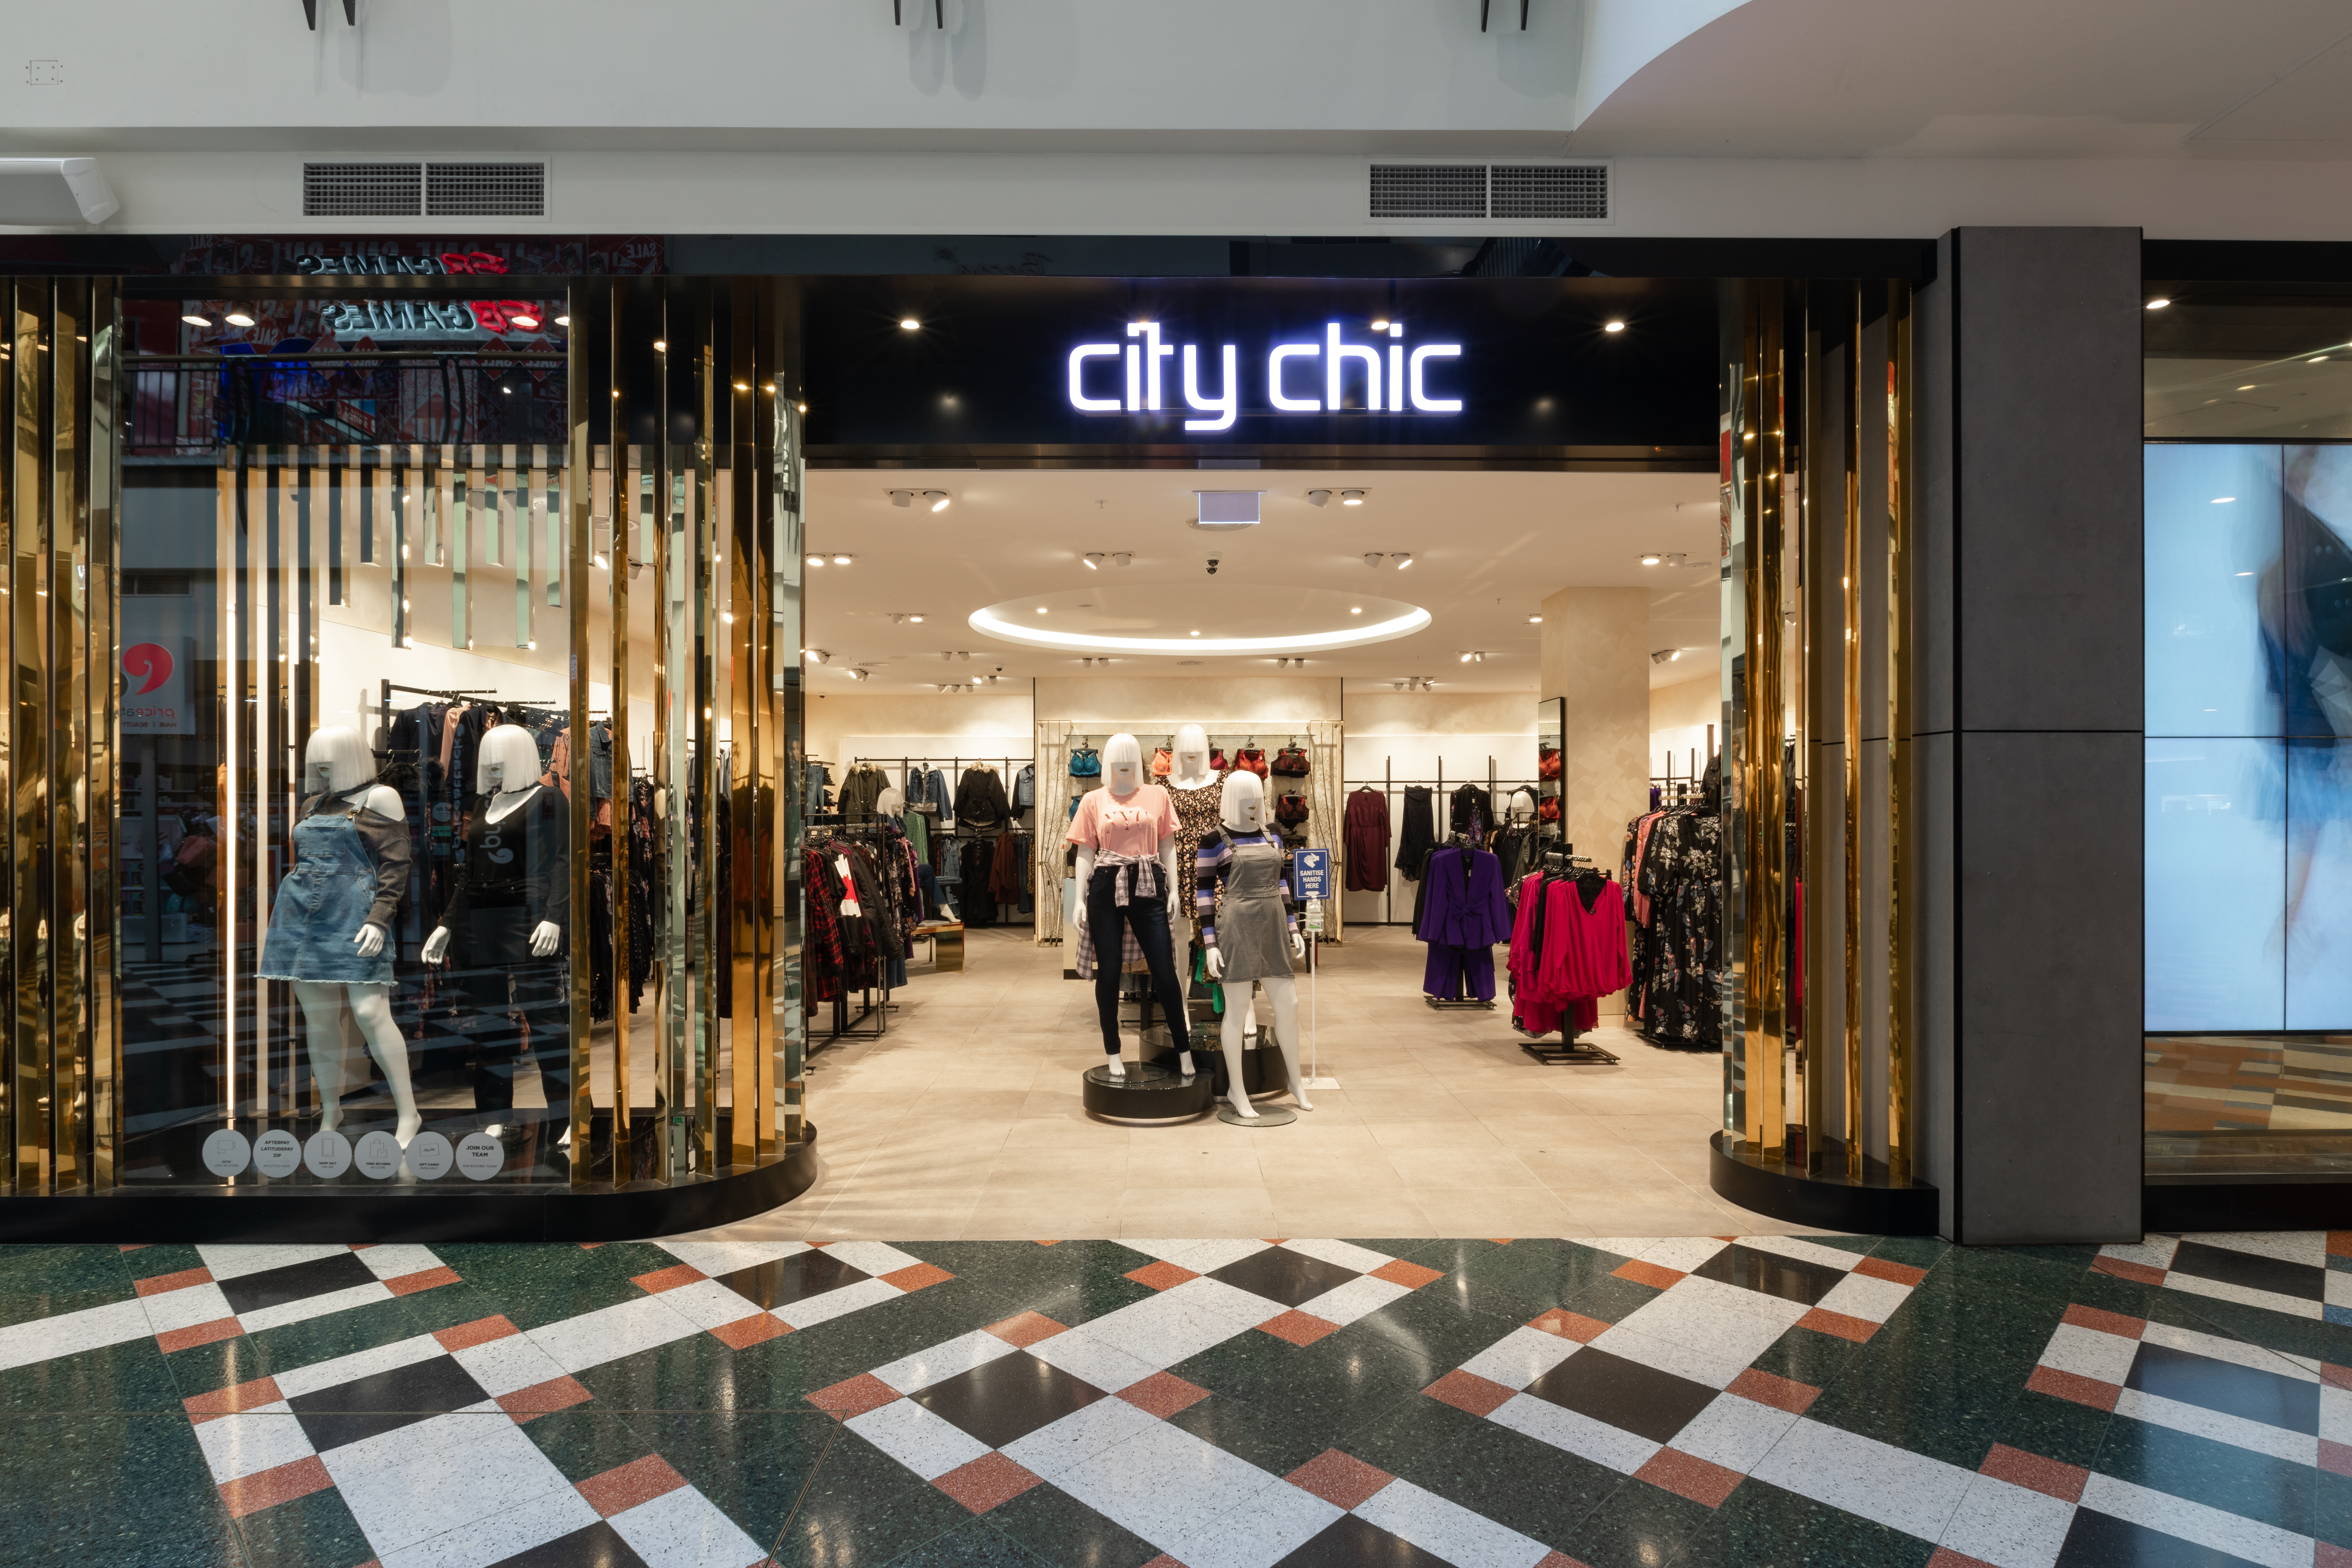 City Chic flags first-half loss as sales and margins decline